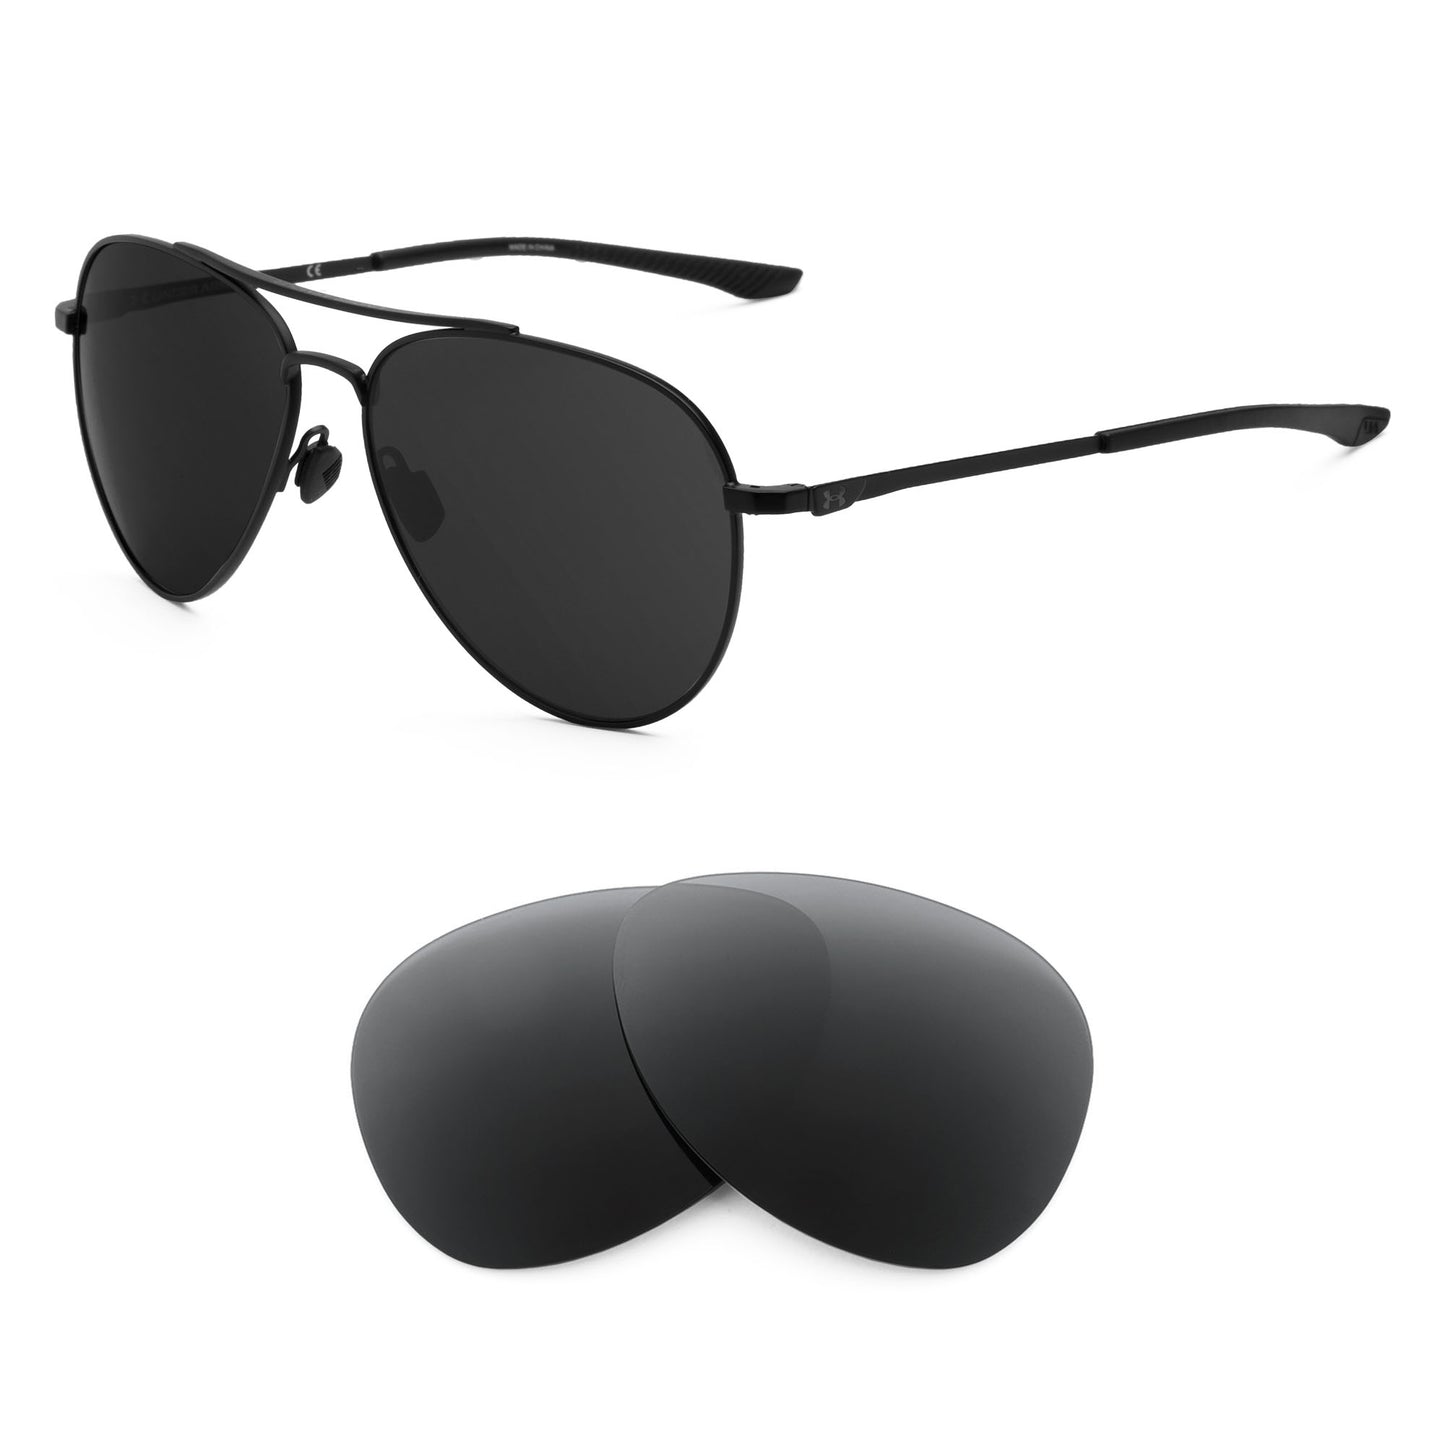 Under Armour Instinct sunglasses with replacement lenses